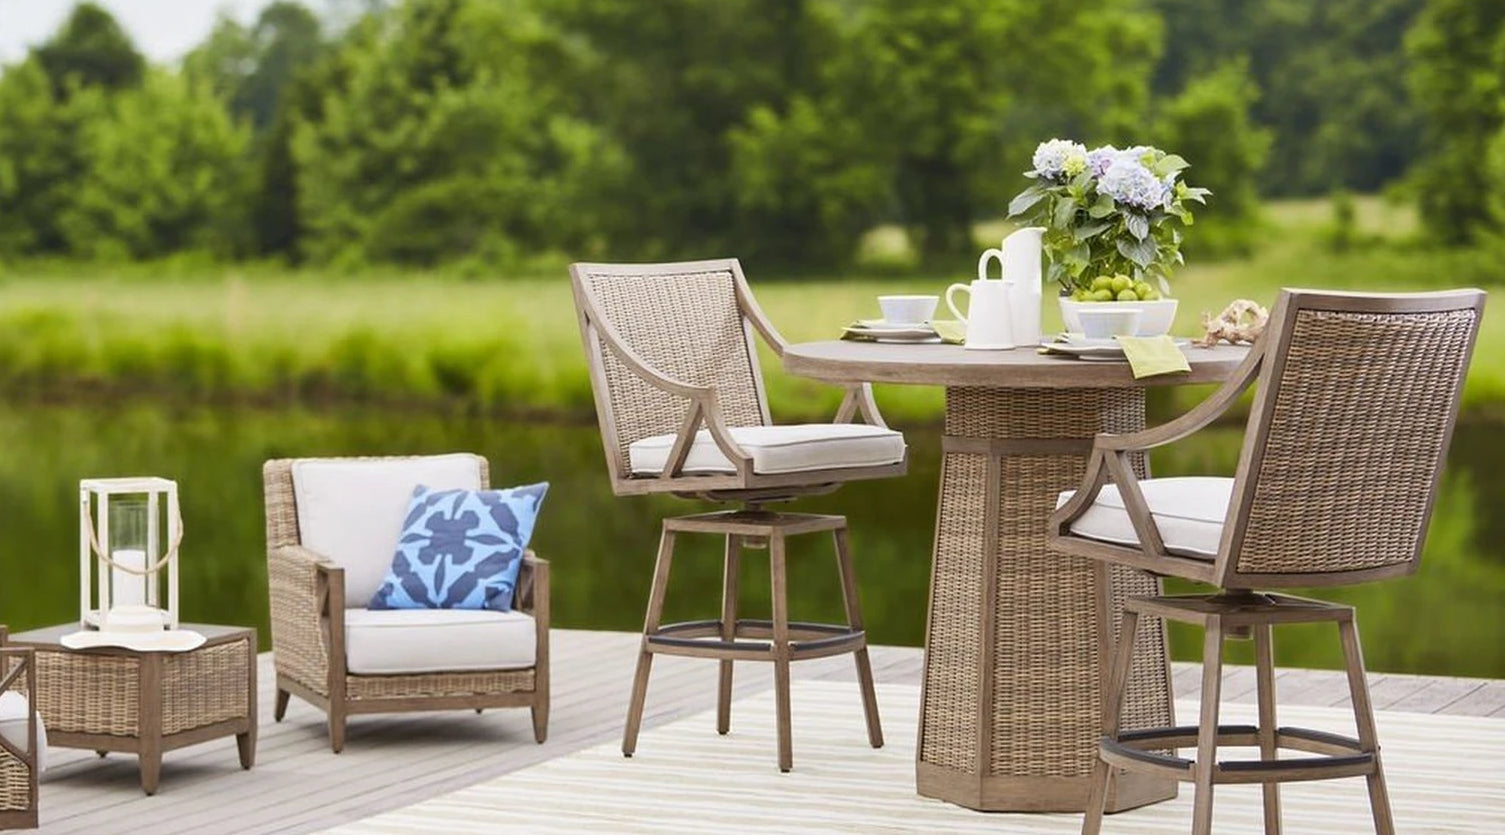 Tips To Choose The Right Backyard Furniture